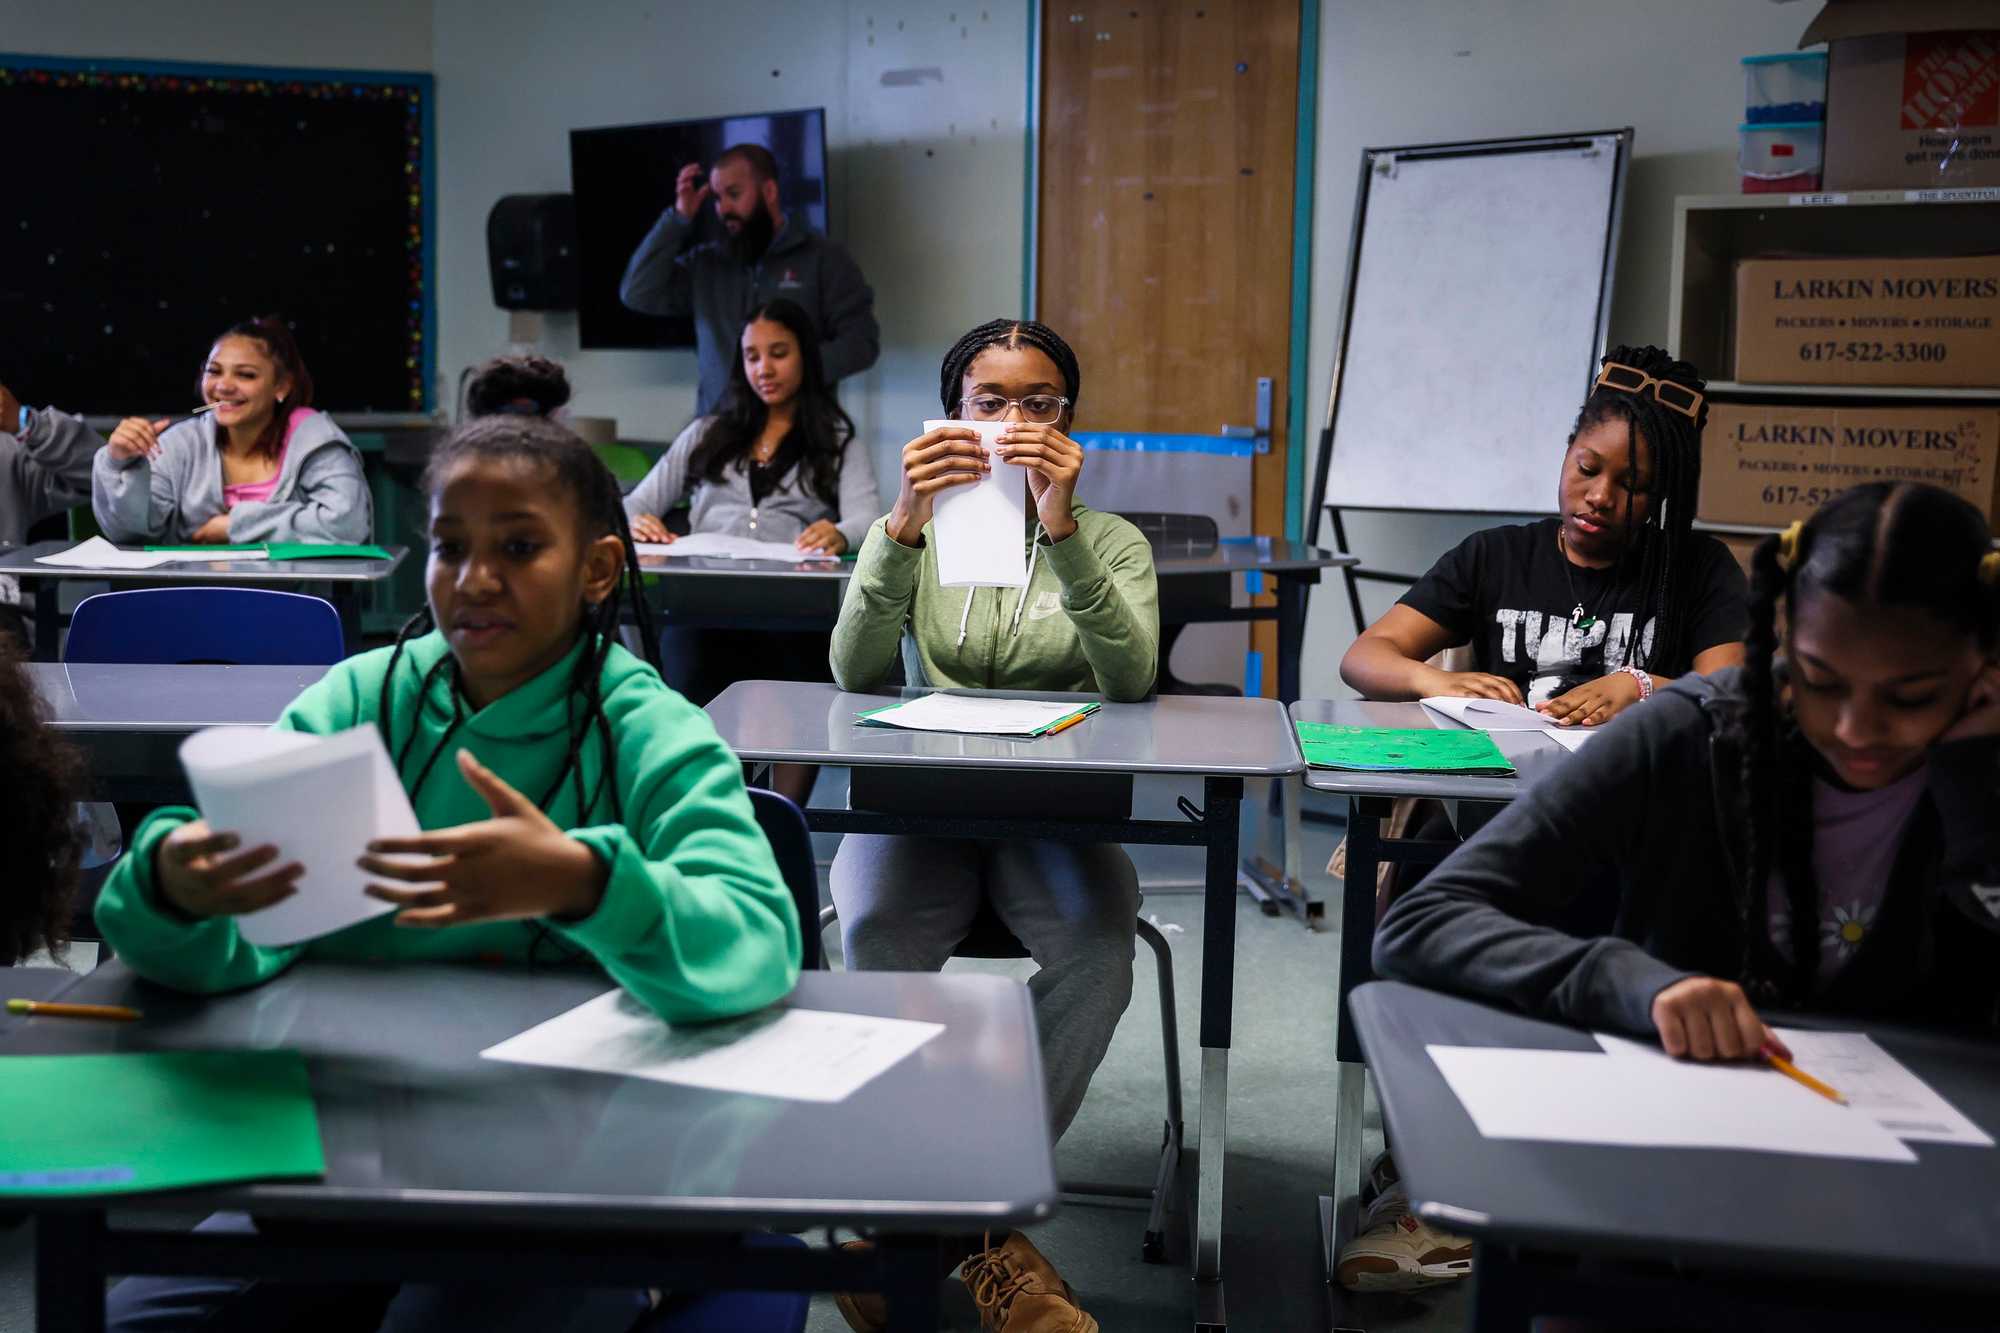 The Lee School, which was built in 1971 to integrate the schools in Dorchester, has more than 500 students, a vast majority of whom are Black and Latino.